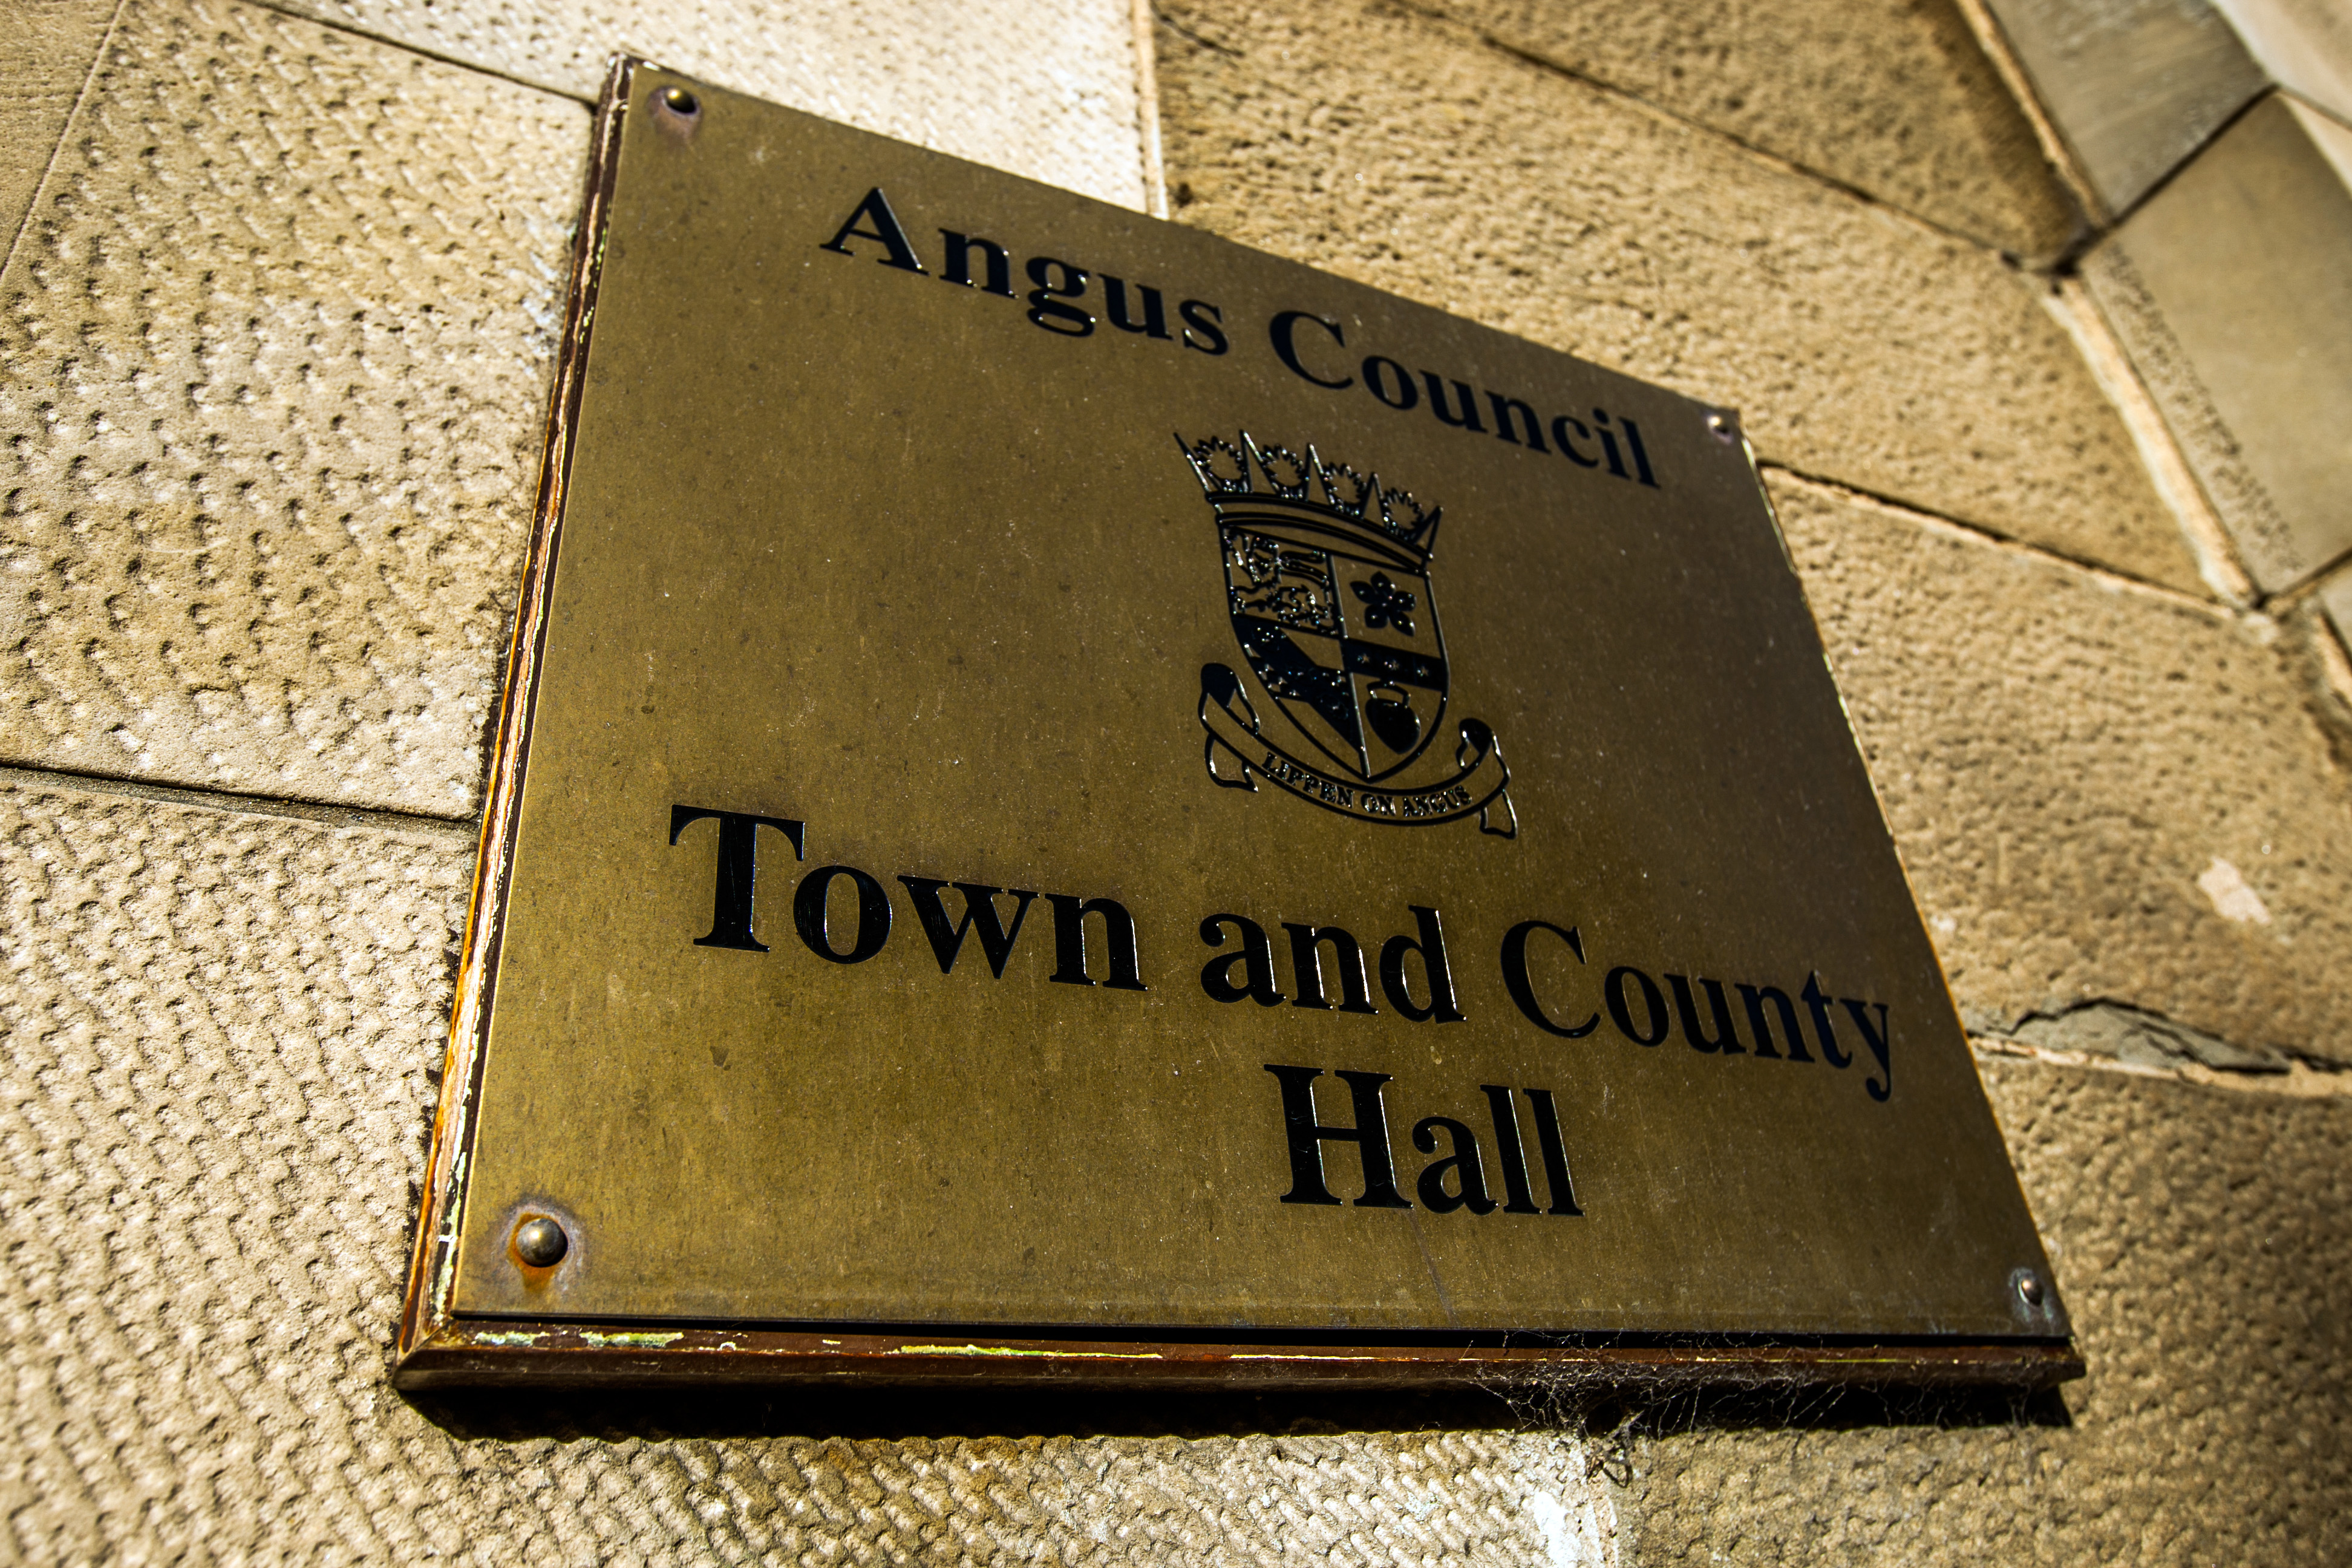 The meeting was held in the Town and County Hall in Forfar.